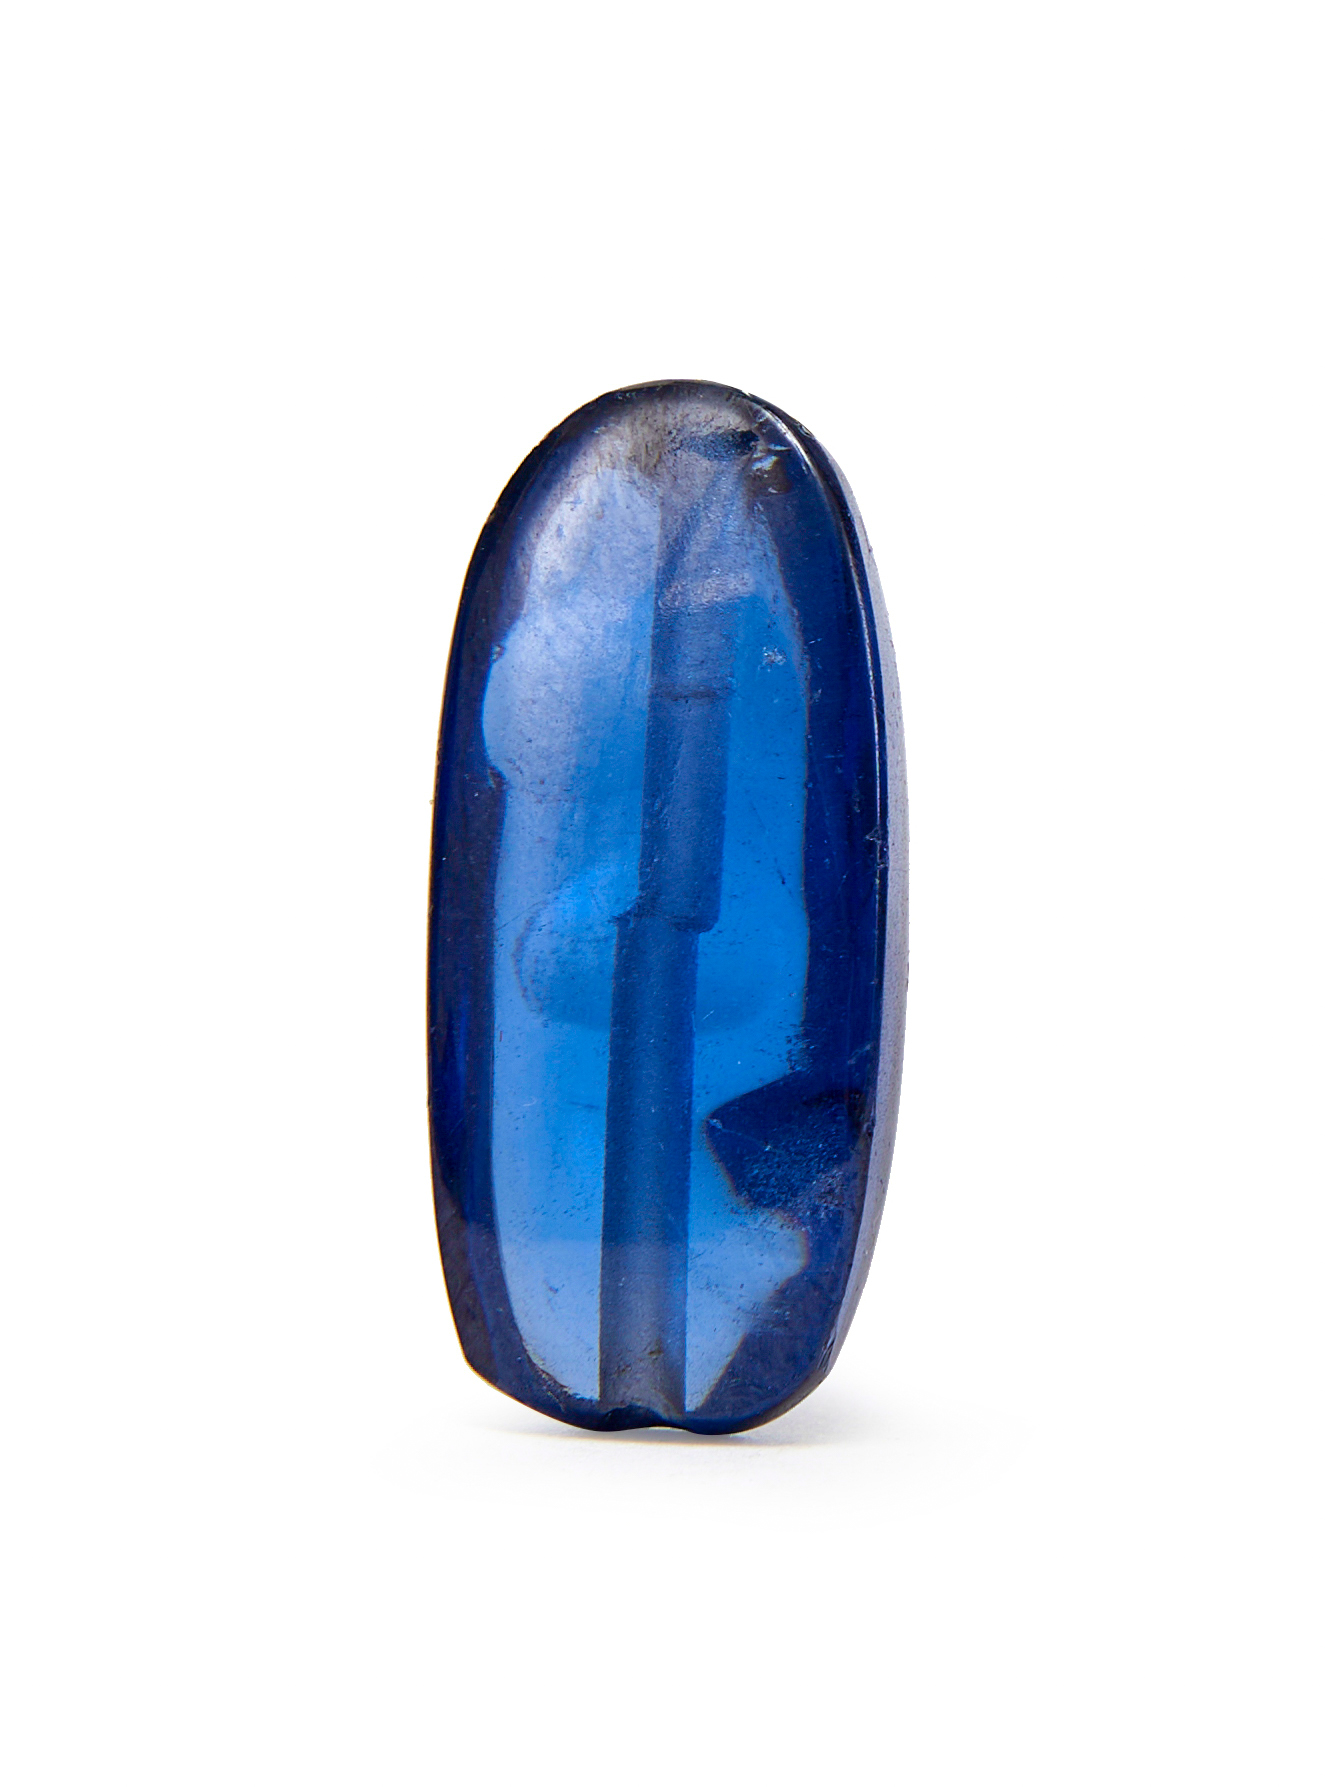 A BLUE GEMSTONE, PROBABLY SAPPHIRE, 19TH CENTURY OR EARLIER - Image 2 of 5